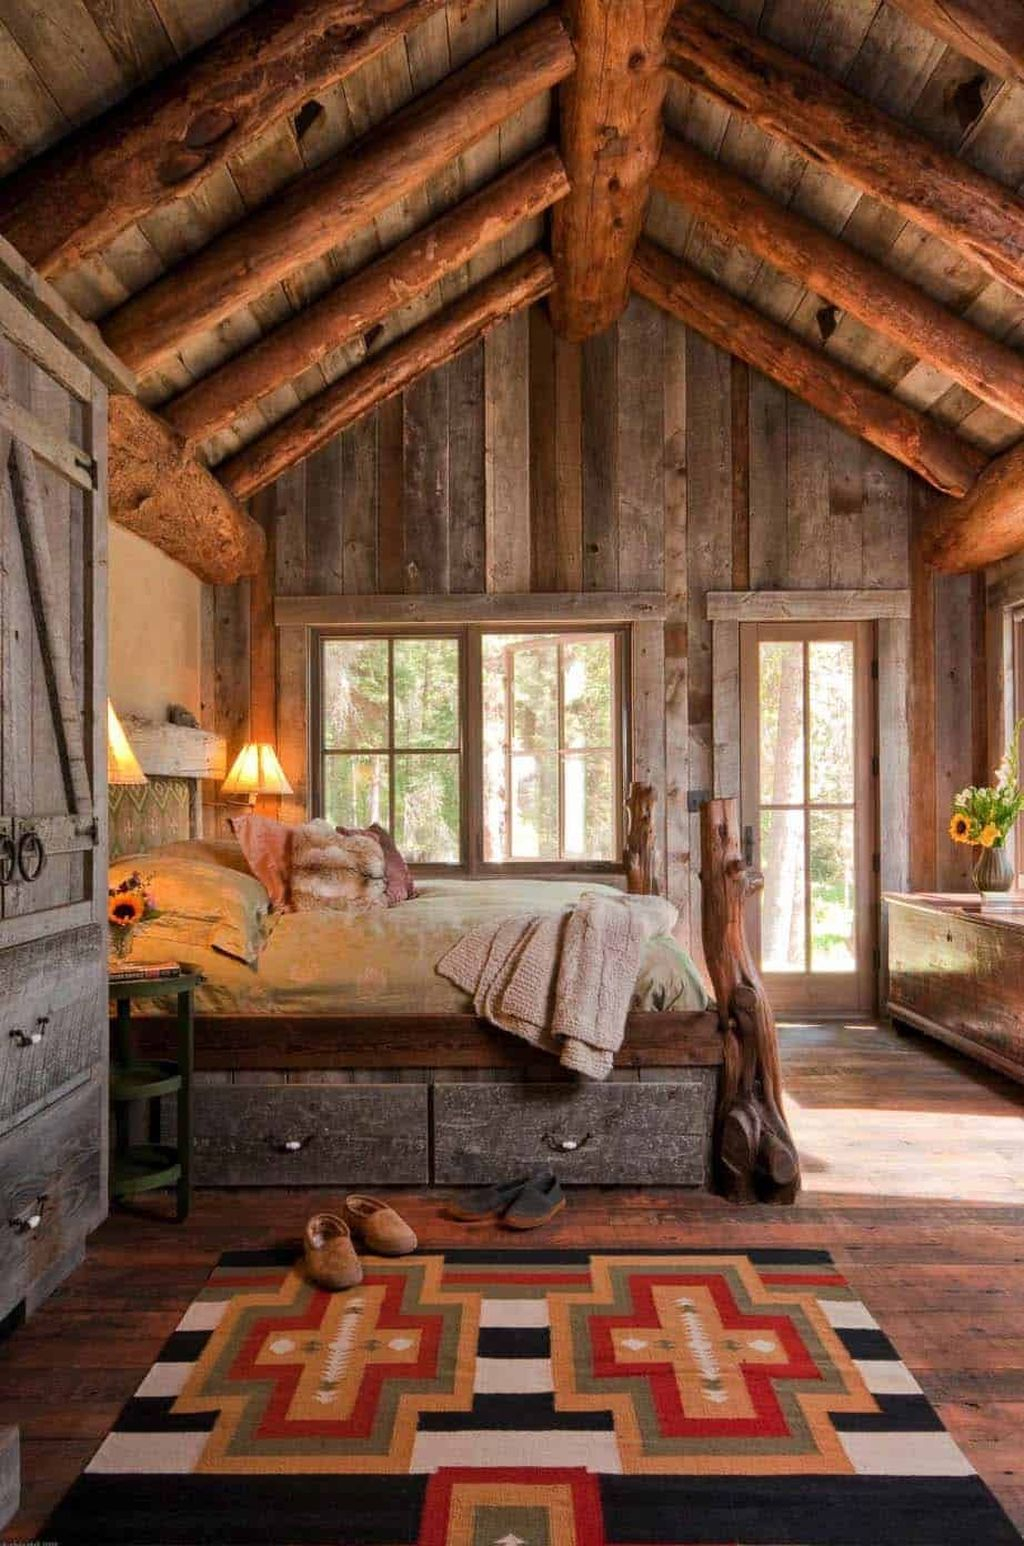 Gorgeous Log Cabin Style Home Interior Design09